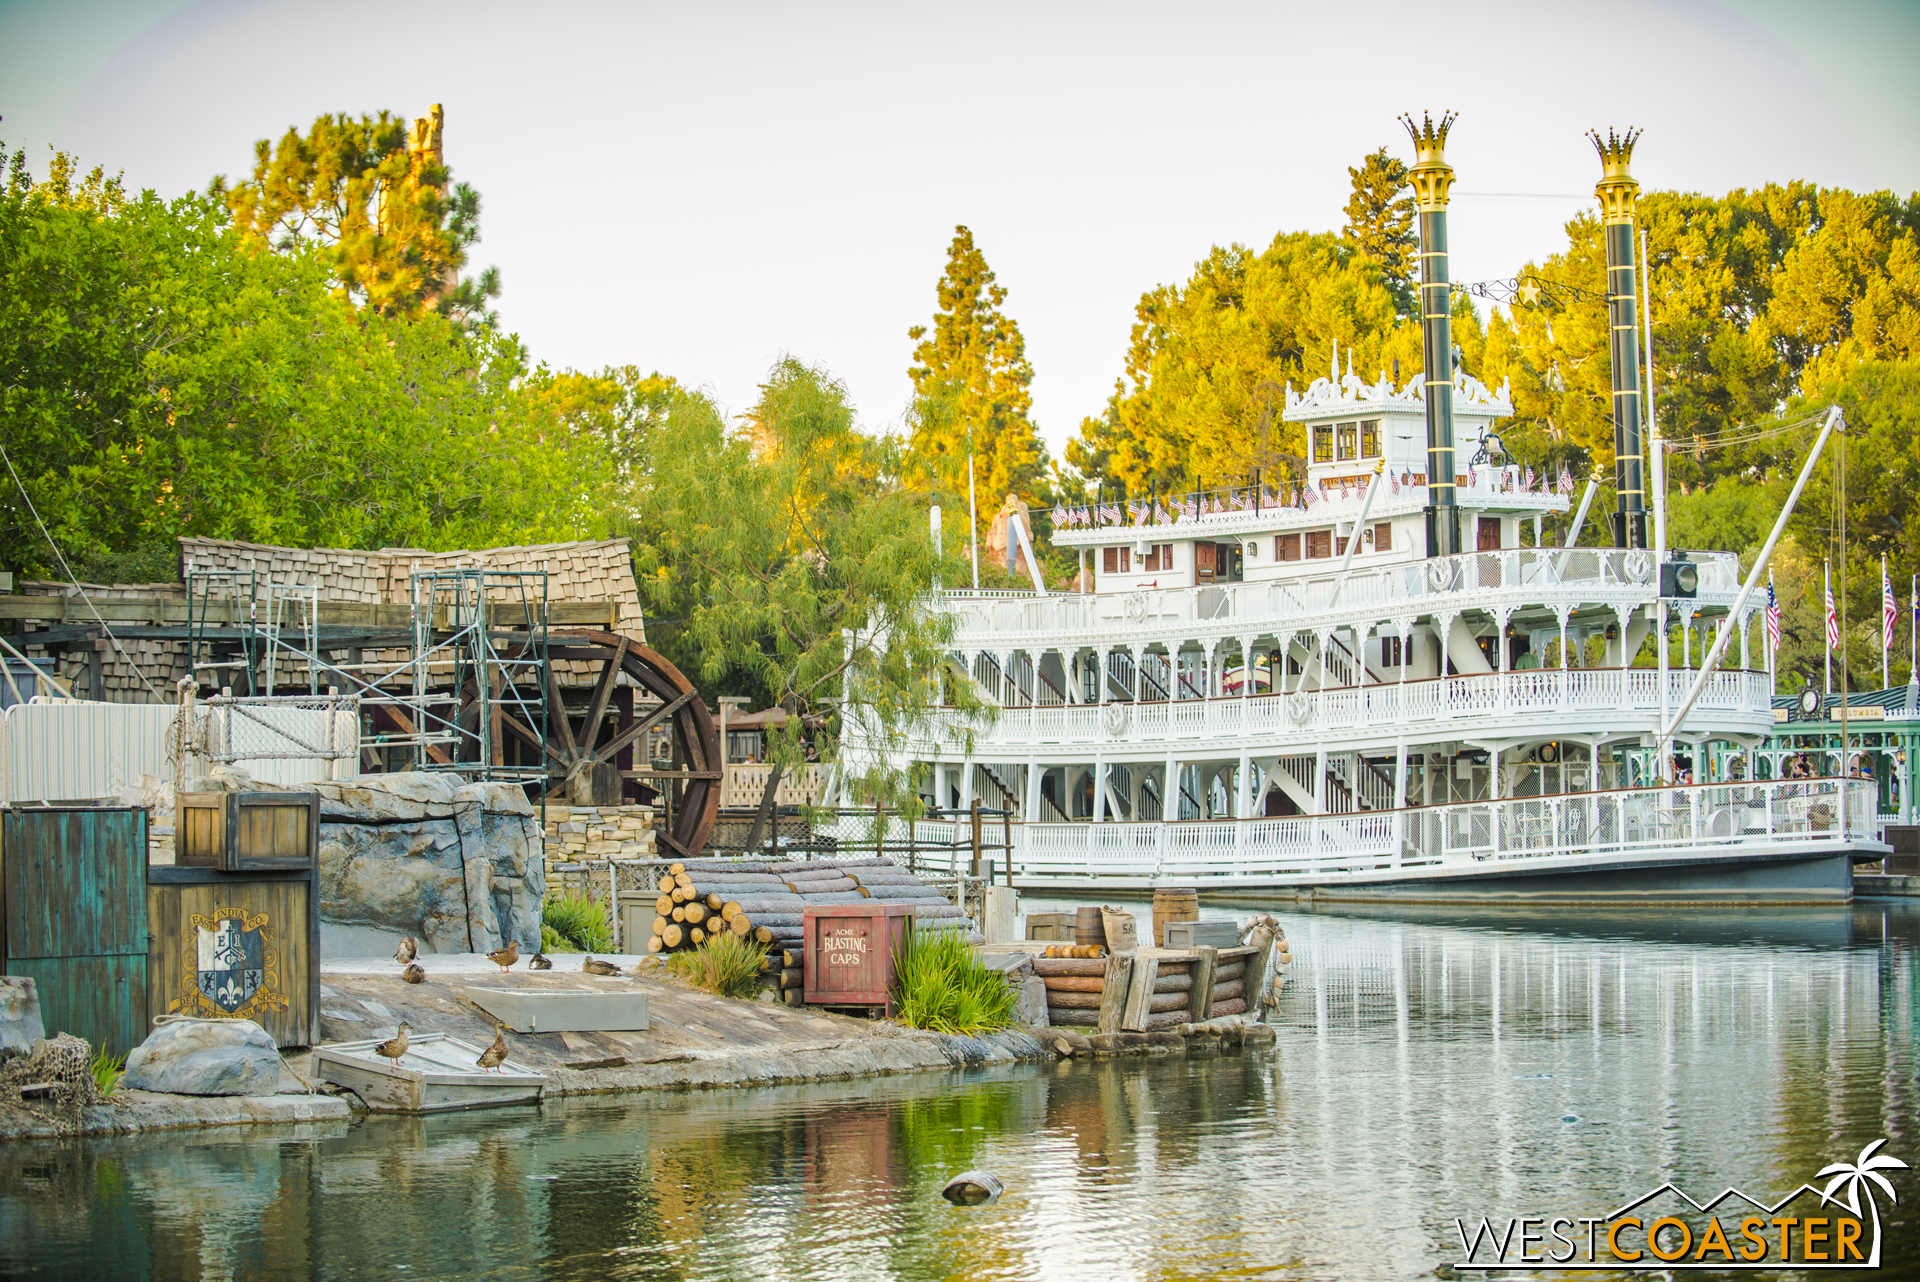  Meanwhile, now that summer is over, the Mark Twain seems to be closing earlier, rather than staying open in the evening hours.&nbsp; You'd think the park might offer fireworks viewing there, but I guess not. 